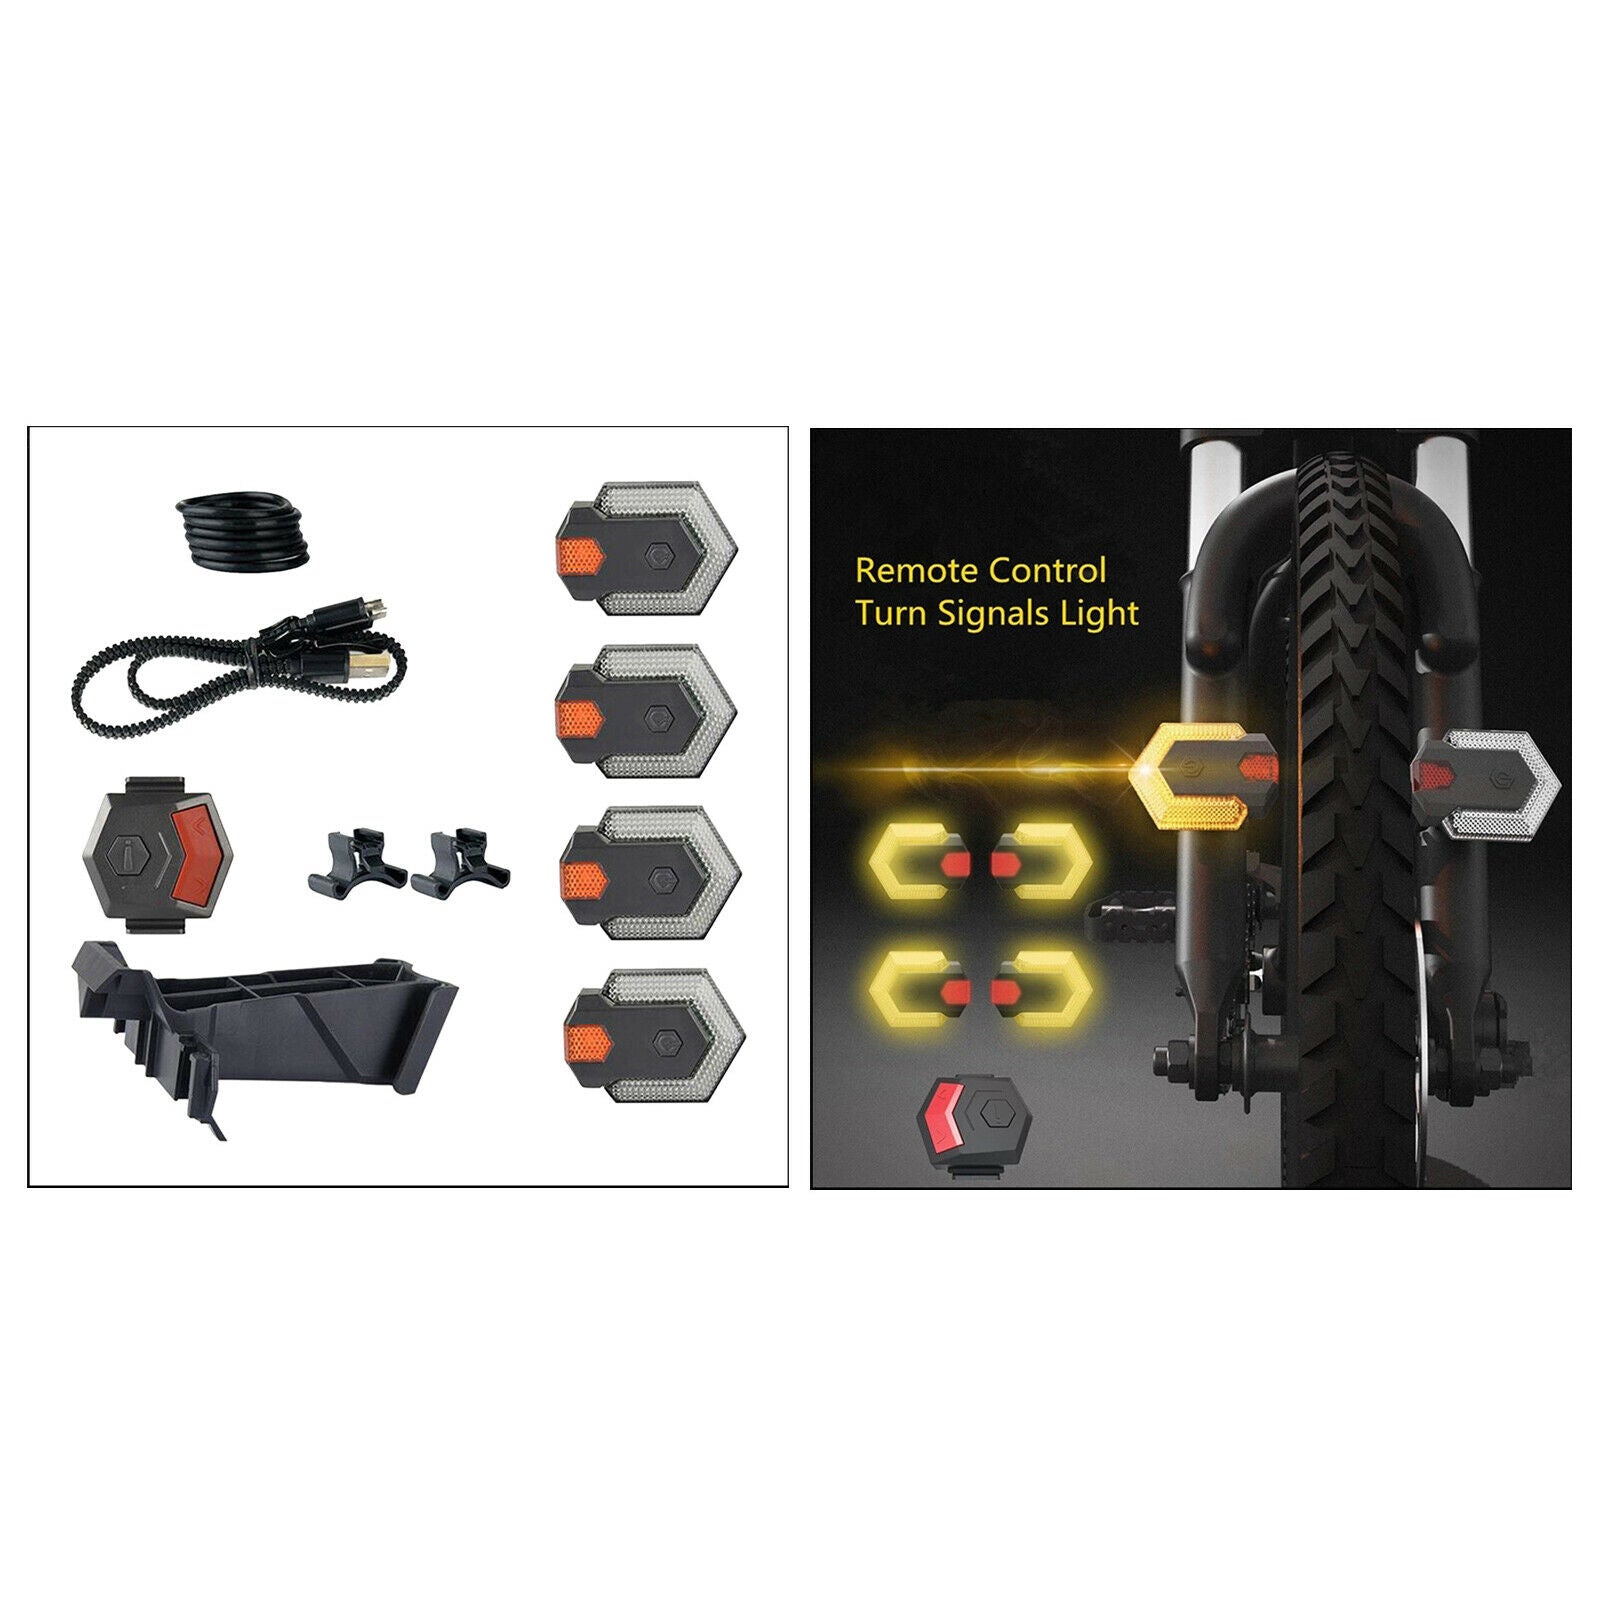 1 Set Bike Turn Signals Light Front and Rear w/Smart Wireless Remote Control